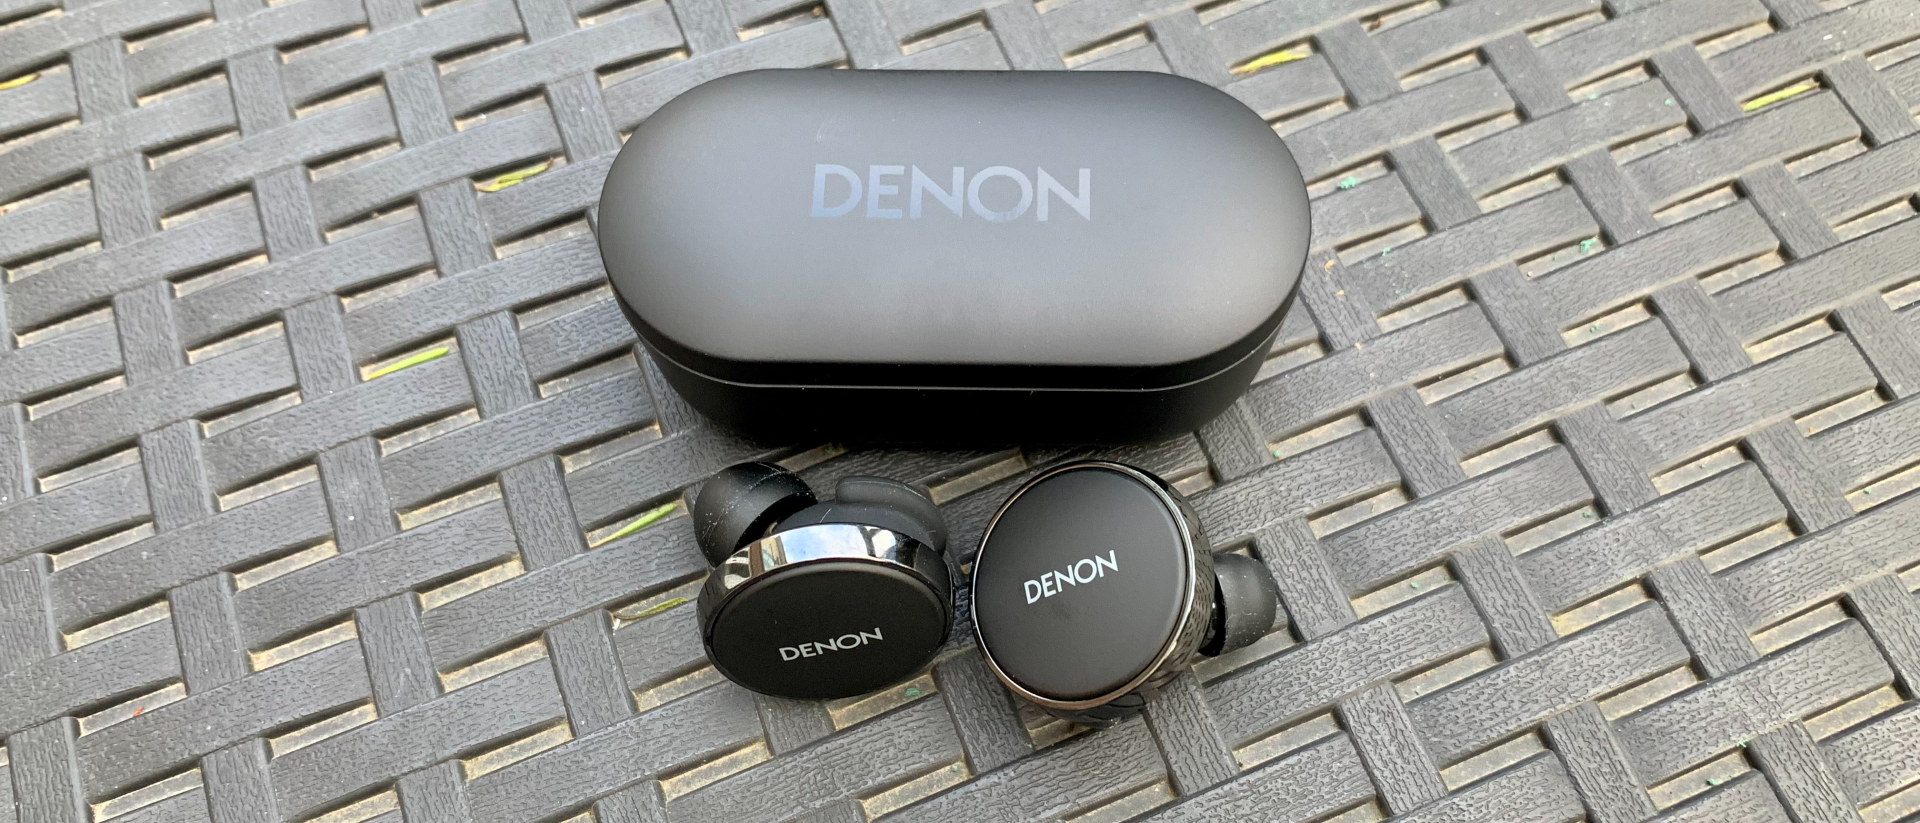 Denon PerL Pro | audio, review: sonic with but TechRadar and profiles a earbuds spatial design wireless excellent bulky